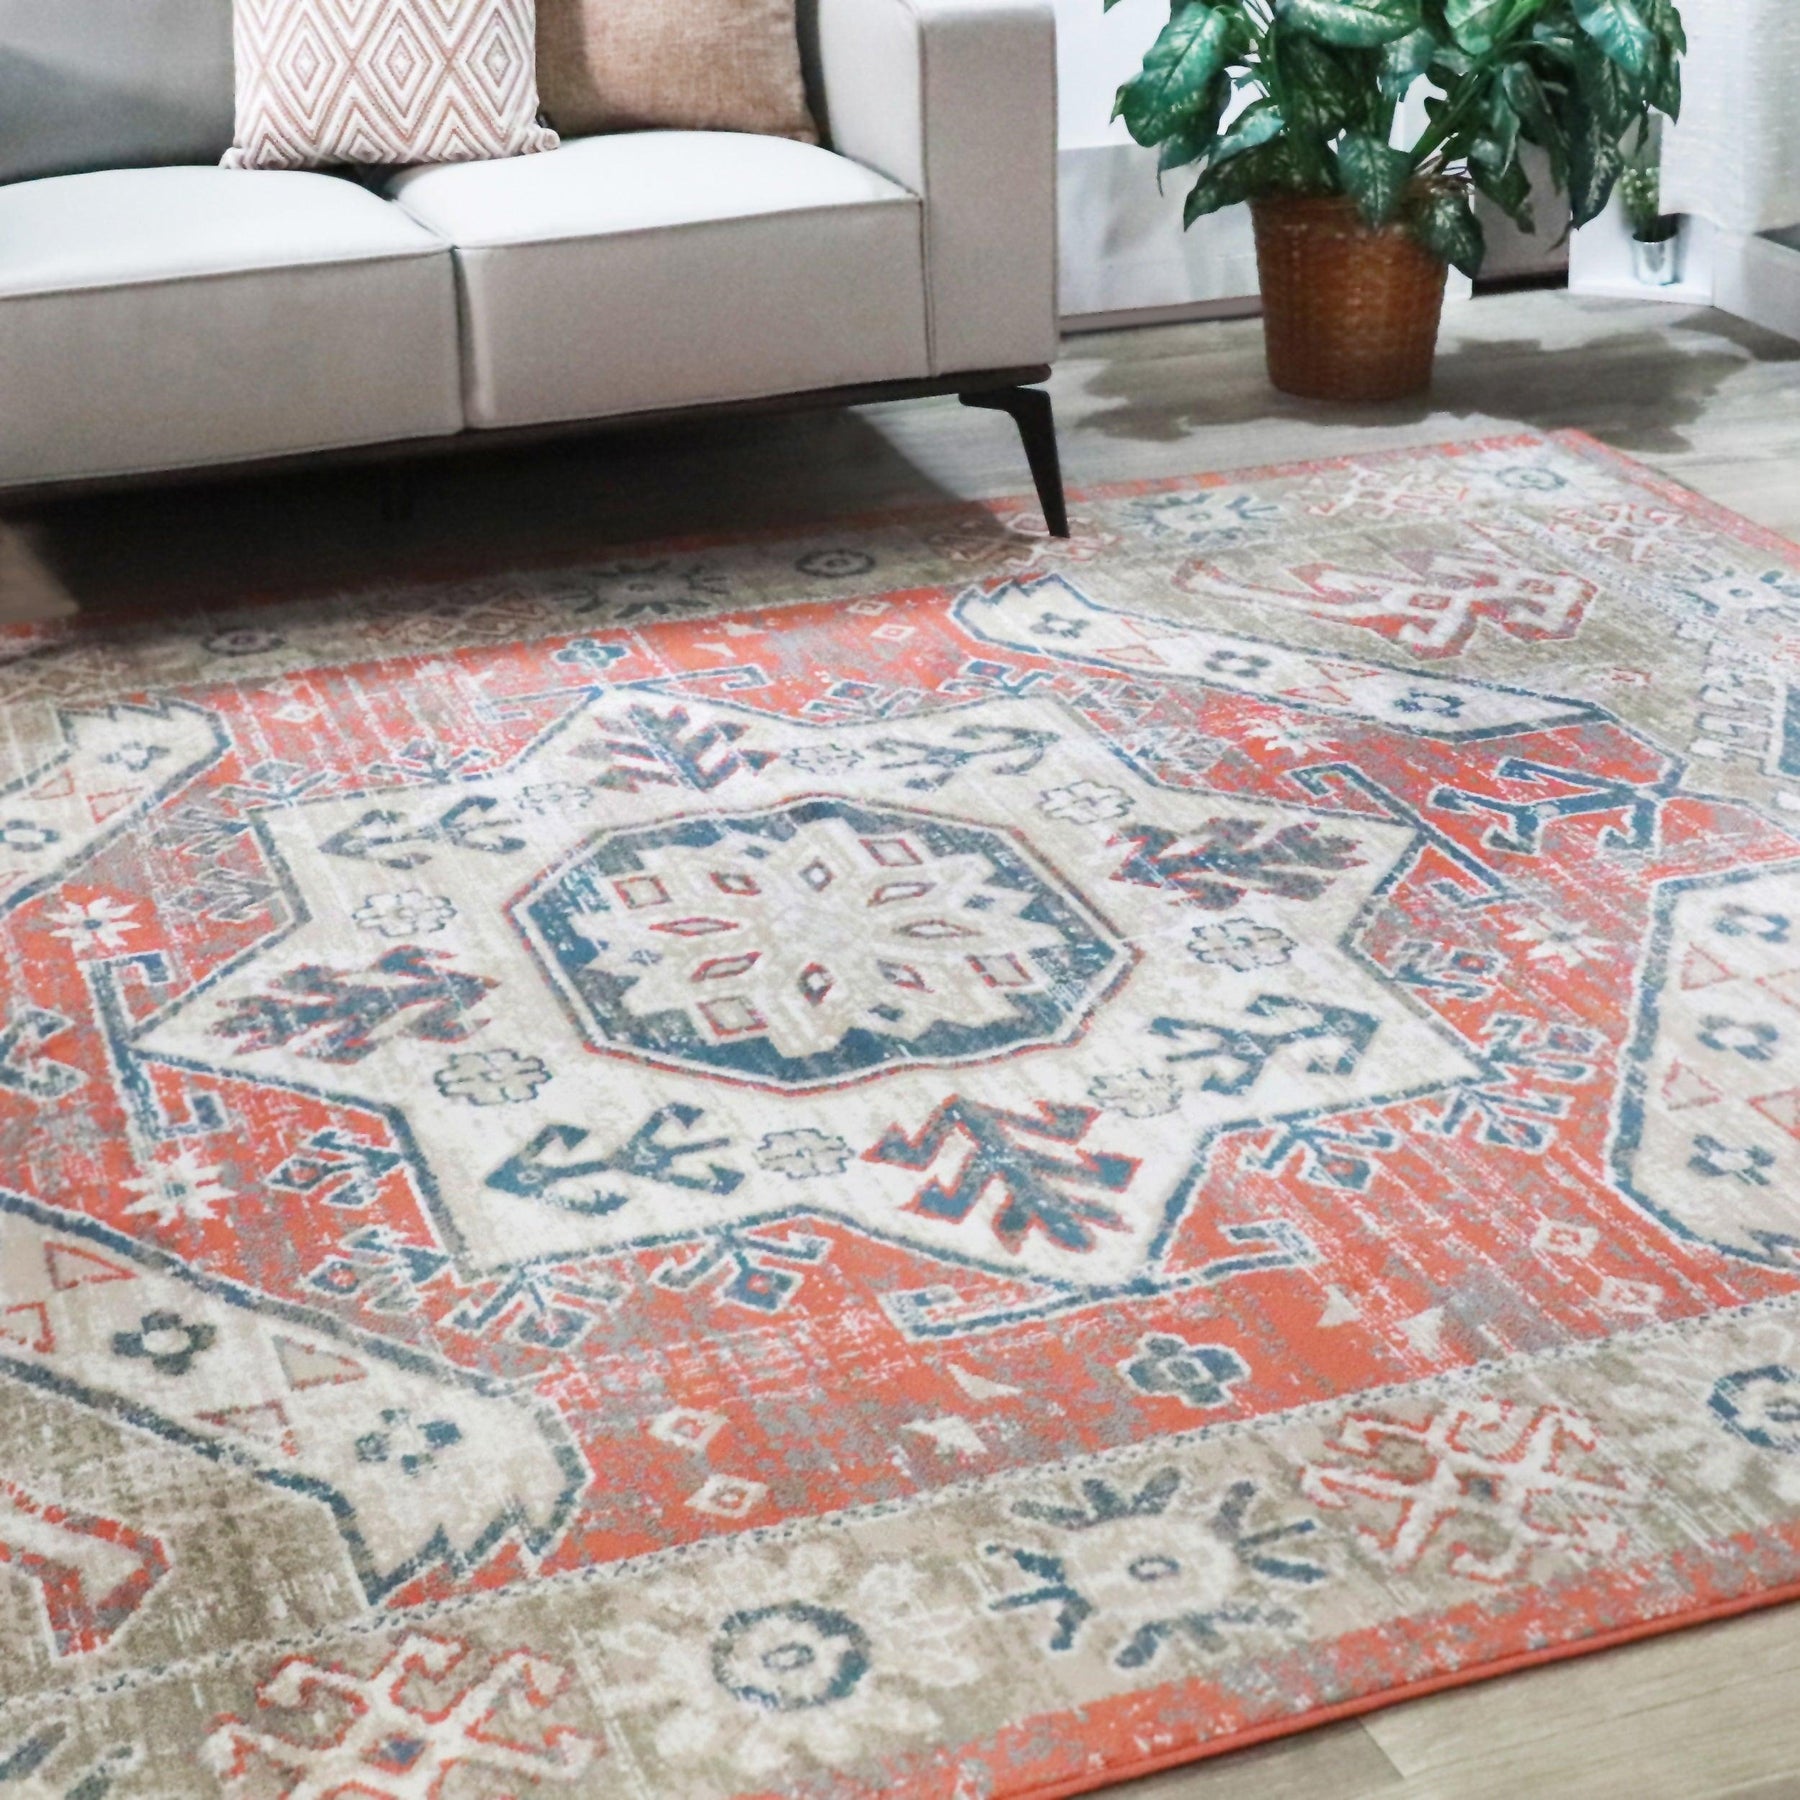 Rustic Distressed Geometric Design Indoor Home Area Rug Collection - Rust